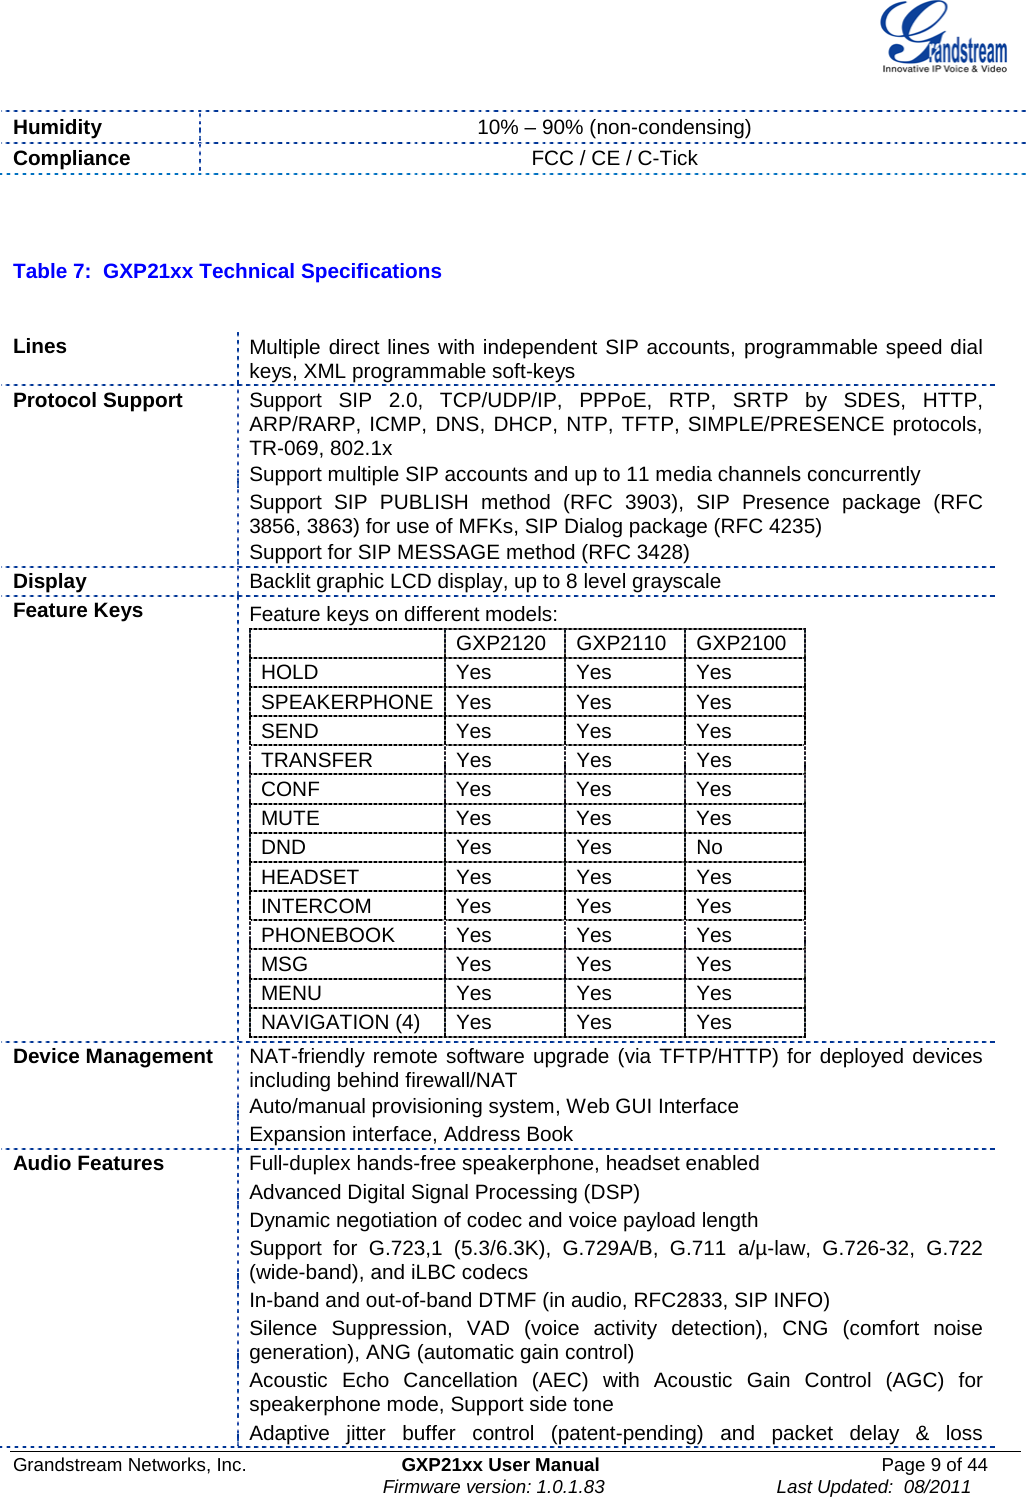  Grandstream Networks, Inc. GXP21xx User Manual Page 9 of 44                                                               Firmware version: 1.0.1.83                                 Last Updated:  08/2011  Humidity 10% – 90% (non-condensing) Compliance FCC / CE / C-Tick   Table 7:  GXP21xx Technical Specifications  Lines  Multiple direct lines with independent SIP accounts, programmable speed dial keys, XML programmable soft-keys Protocol Support Support SIP 2.0, TCP/UDP/IP, PPPoE, RTP, SRTP by SDES, HTTP, ARP/RARP, ICMP, DNS, DHCP, NTP, TFTP, SIMPLE/PRESENCE protocols, TR-069, 802.1x Support multiple SIP accounts and up to 11 media channels concurrently  Support SIP PUBLISH method (RFC 3903), SIP Presence package (RFC 3856, 3863) for use of MFKs, SIP Dialog package (RFC 4235)  Support for SIP MESSAGE method (RFC 3428) Display  Backlit graphic LCD display, up to 8 level grayscale Feature Keys                  Feature keys on different models:  GXP2120 GXP2110  GXP2100 HOLD Yes Yes Yes SPEAKERPHONE Yes Yes Yes SEND Yes Yes Yes TRANSFER Yes Yes Yes CONF Yes Yes Yes MUTE Yes Yes Yes DND Yes Yes No HEADSET Yes Yes Yes INTERCOM Yes Yes Yes PHONEBOOK Yes Yes Yes MSG Yes Yes Yes MENU  Yes Yes Yes NAVIGATION (4) Yes Yes Yes  Device Management  NAT-friendly remote software upgrade (via TFTP/HTTP) for deployed devices including behind firewall/NAT Auto/manual provisioning system, Web GUI Interface   Expansion interface, Address Book Audio Features  Full-duplex hands-free speakerphone, headset enabled  Advanced Digital Signal Processing (DSP)  Dynamic negotiation of codec and voice payload length  Support for G.723,1 (5.3/6.3K), G.729A/B, G.711 a/µ-law,  G.726-32, G.722 (wide-band), and iLBC codecs  In-band and out-of-band DTMF (in audio, RFC2833, SIP INFO)  Silence Suppression, VAD (voice activity detection), CNG (comfort noise generation), ANG (automatic gain control)  Acoustic Echo Cancellation (AEC) with Acoustic Gain Control (AGC) for speakerphone mode, Support side tone  Adaptive jitter buffer control (patent-pending) and packet delay &amp; loss 